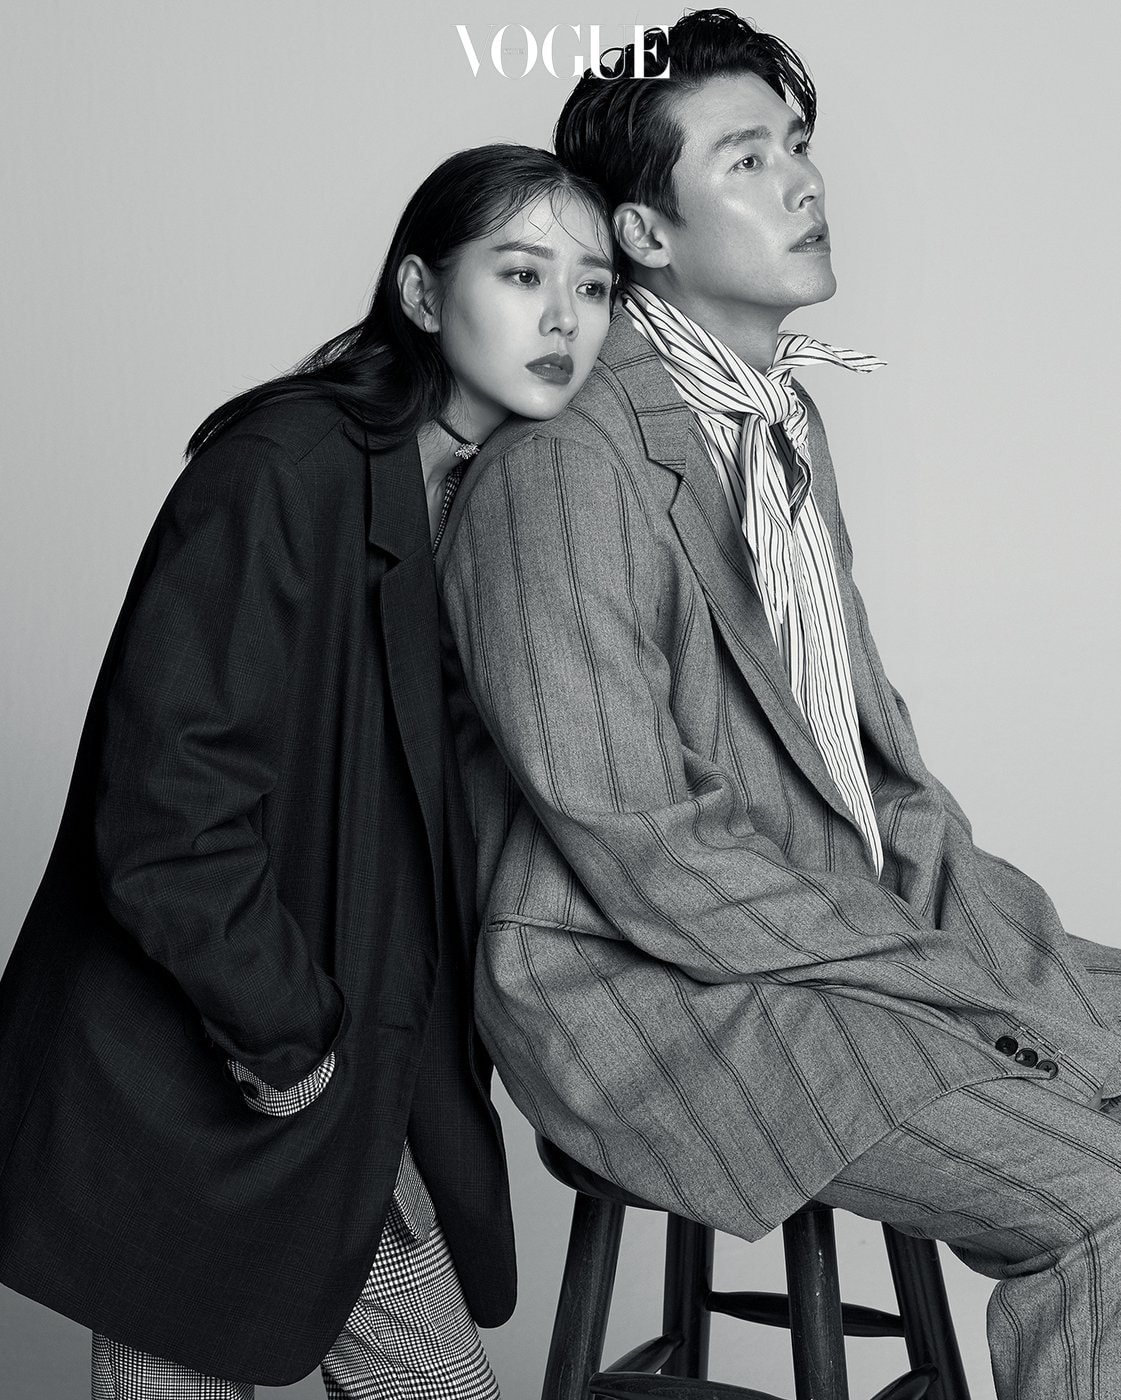 hyun bin and son ye jin shooting vogue for promoting new movie